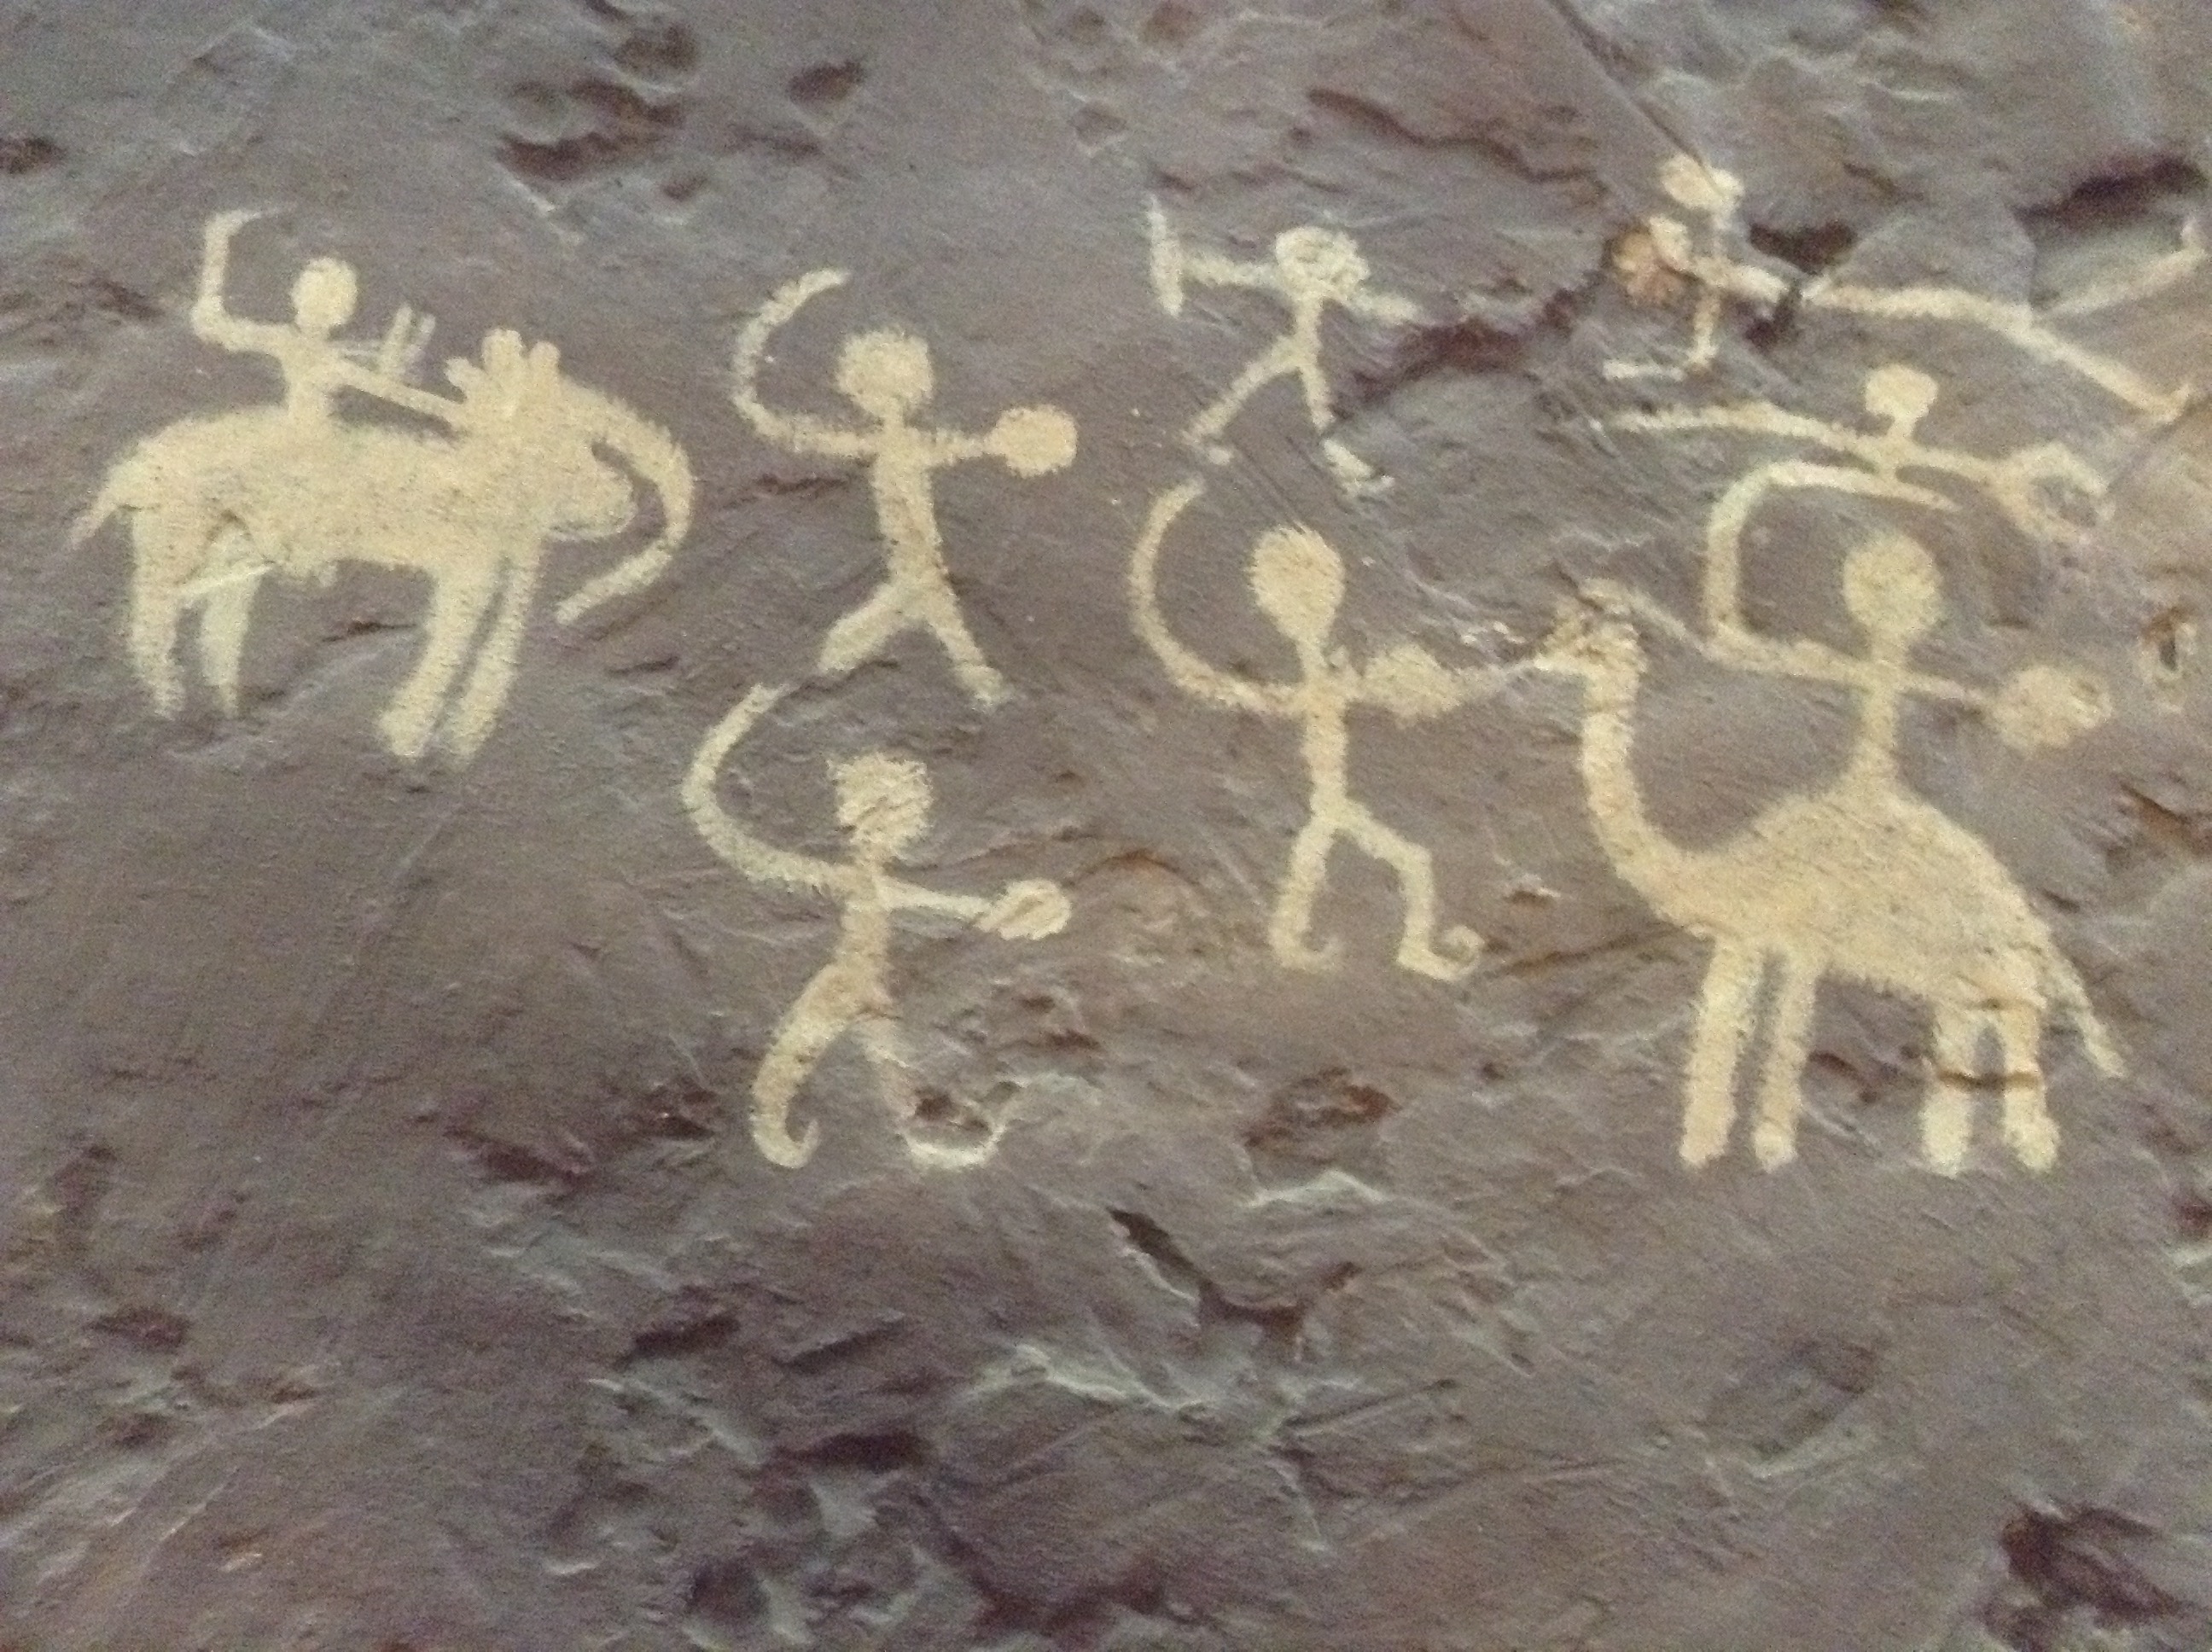 An example of rock art created by the Early Man